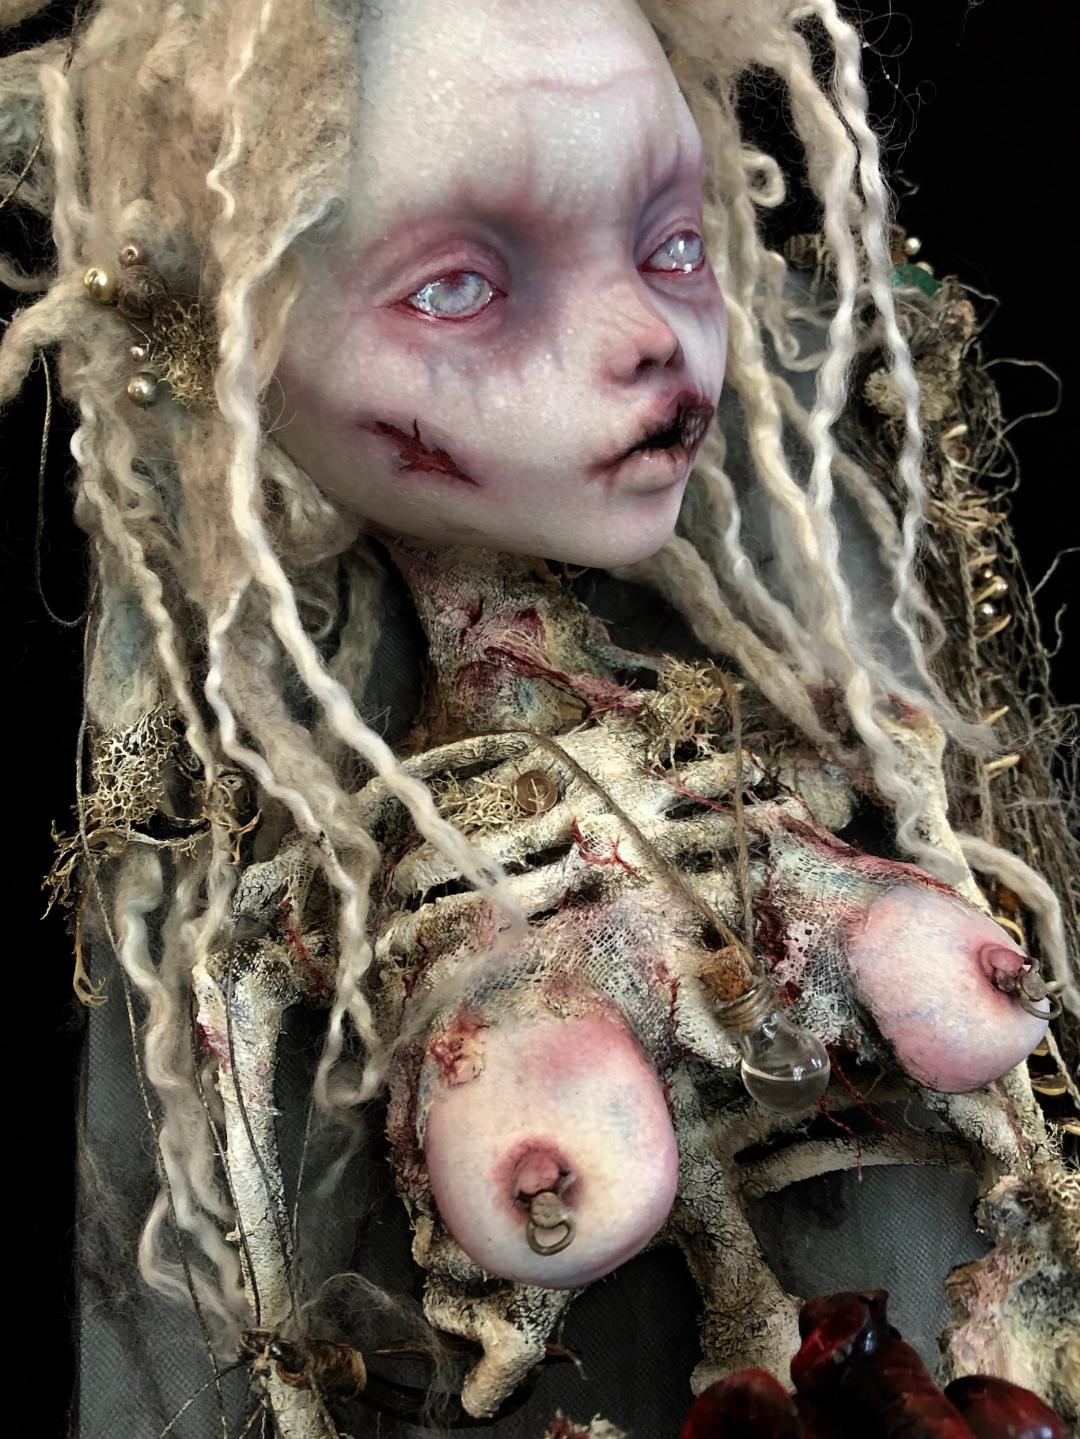 close-up of ghostly skeletal mermaid doll's face and ribcage goth doll repaint mixed media